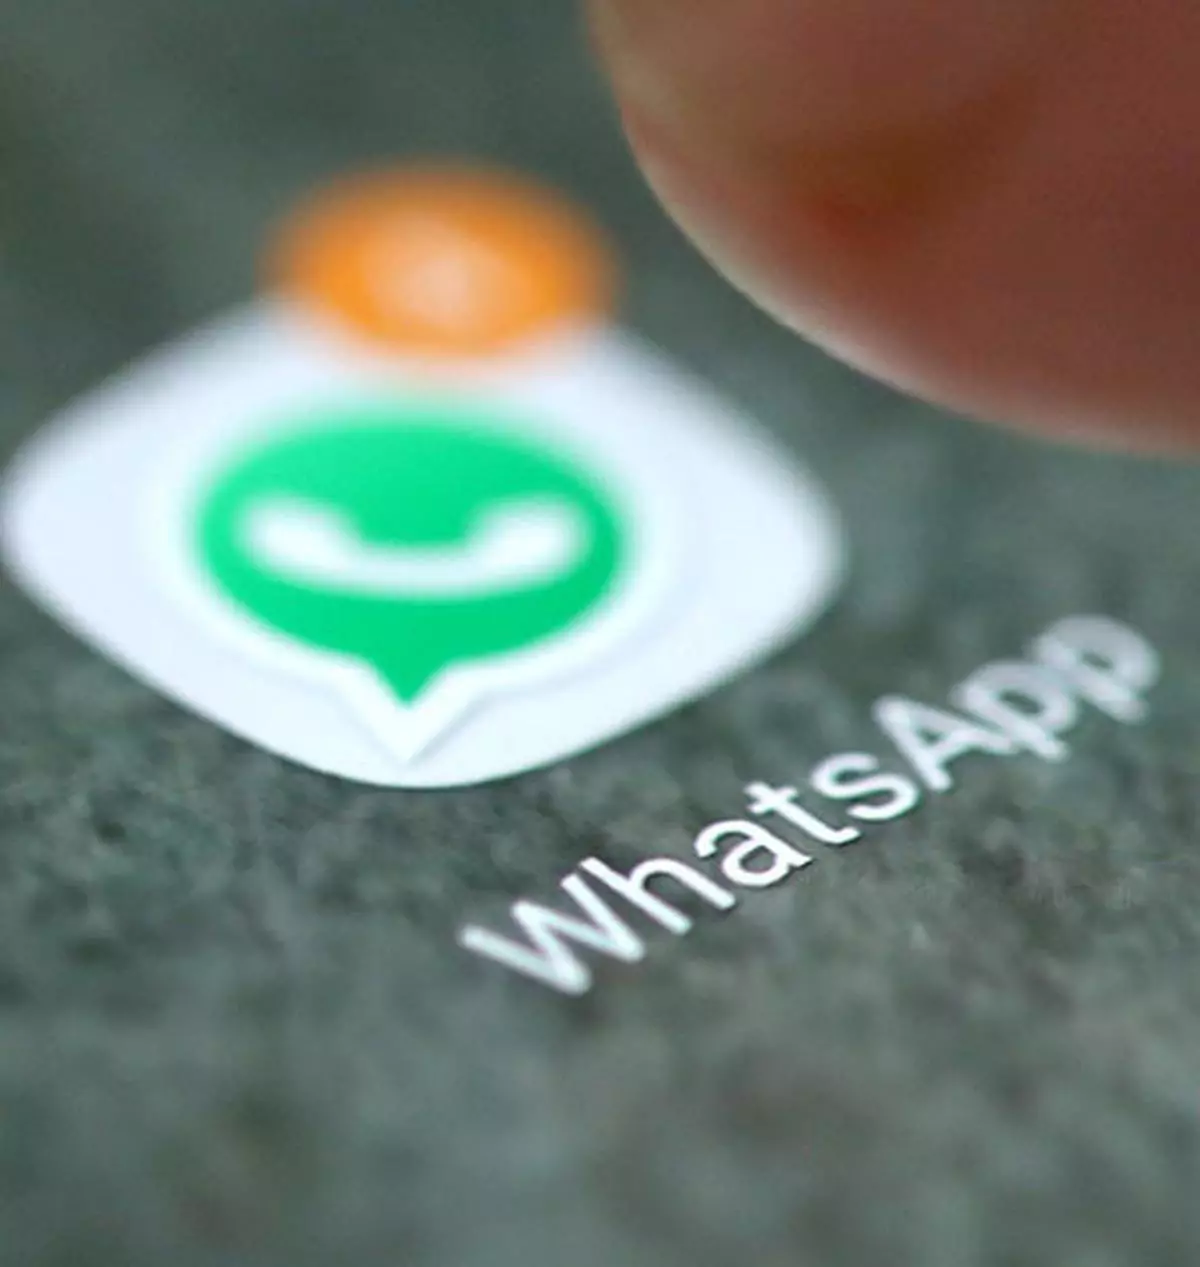 WhatsApp expands ability to forward attachments with captions on iOS